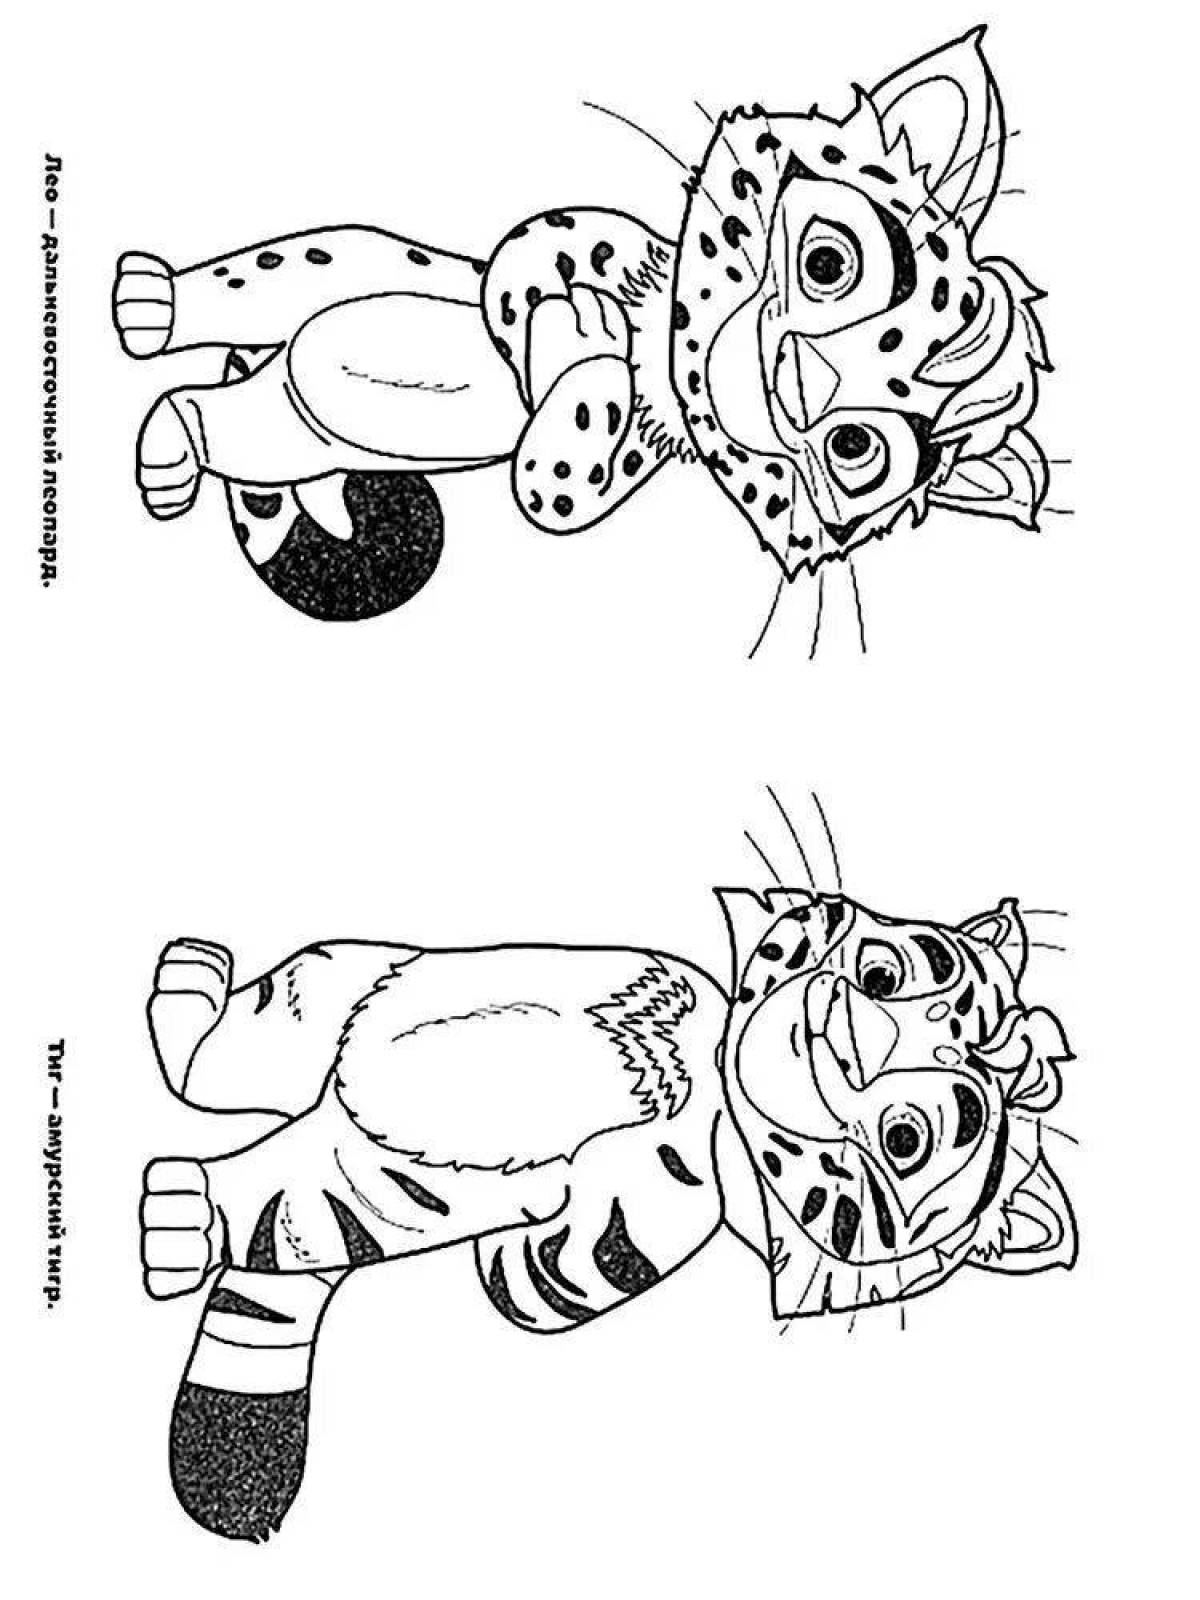 Funny tiger and lion coloring pages for kids